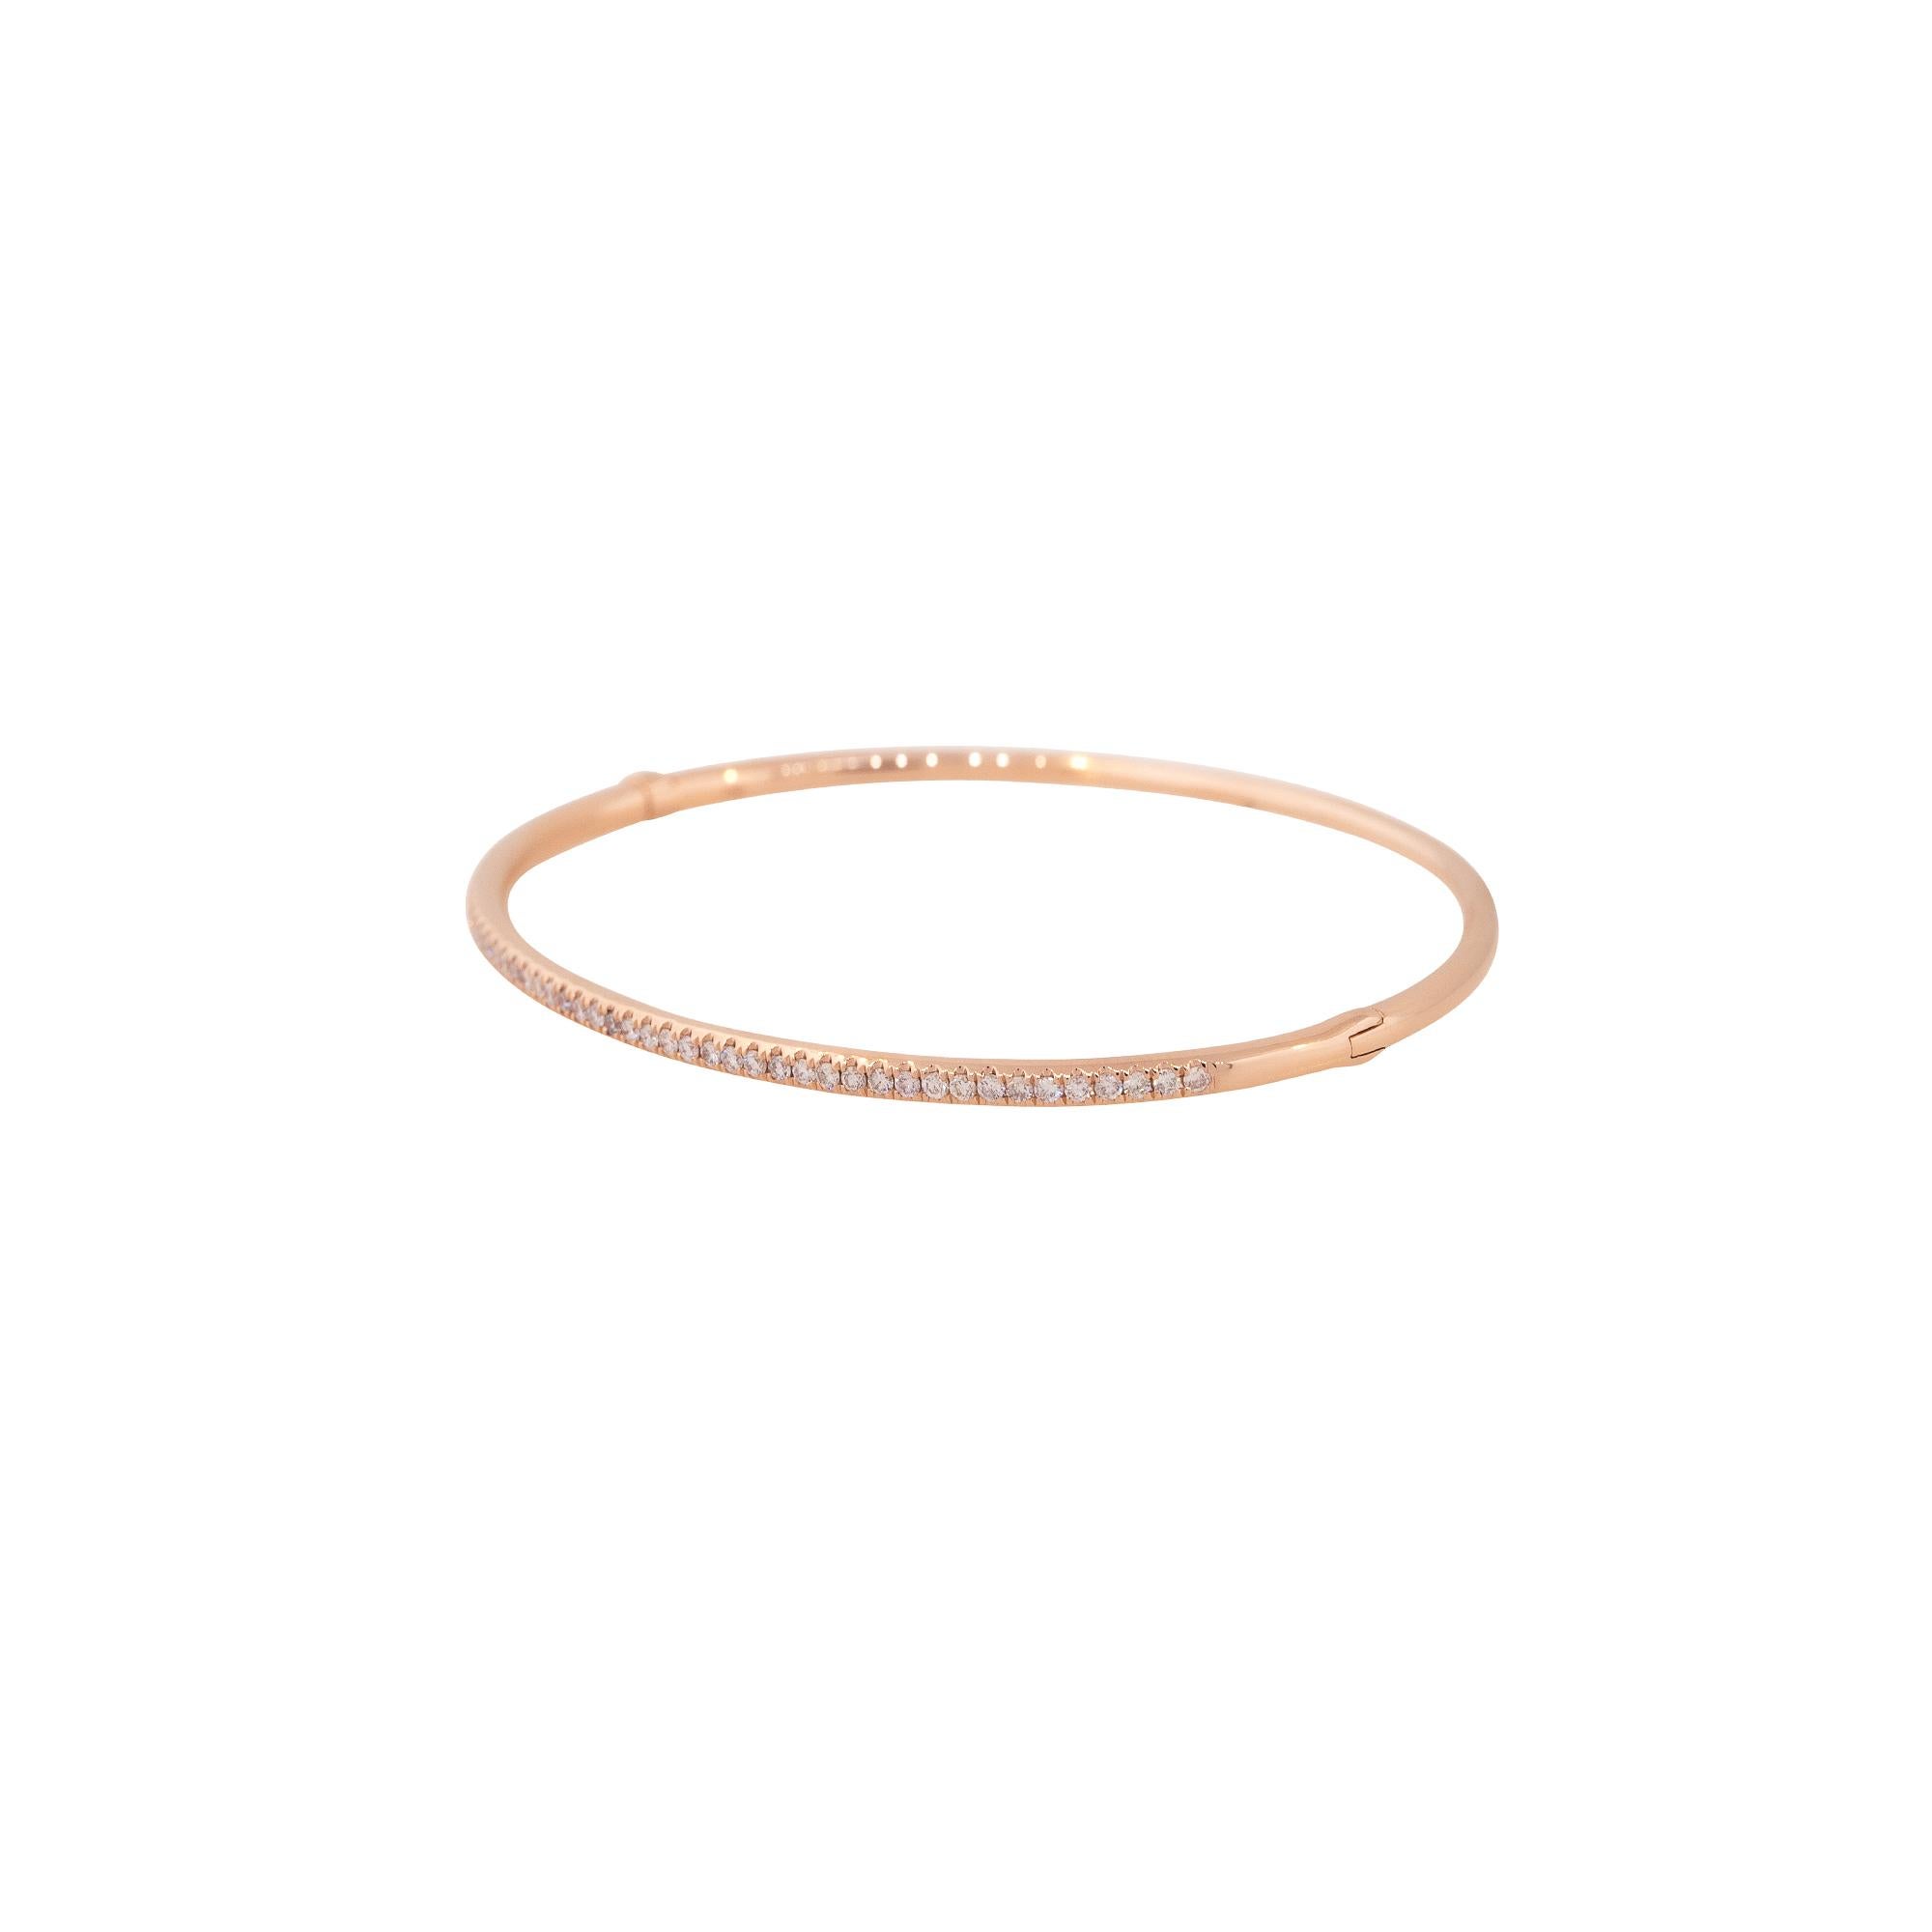 18k Rose Gold 0.50ctw Diamond Bangle Bracelet

Material: 18k Rose Gold
Diamond Details: Approximately 0.50ctw of Round Cut Diamonds.
Total Weight: 5.5g (8.55dwts)
Size: Will fit a 6.5